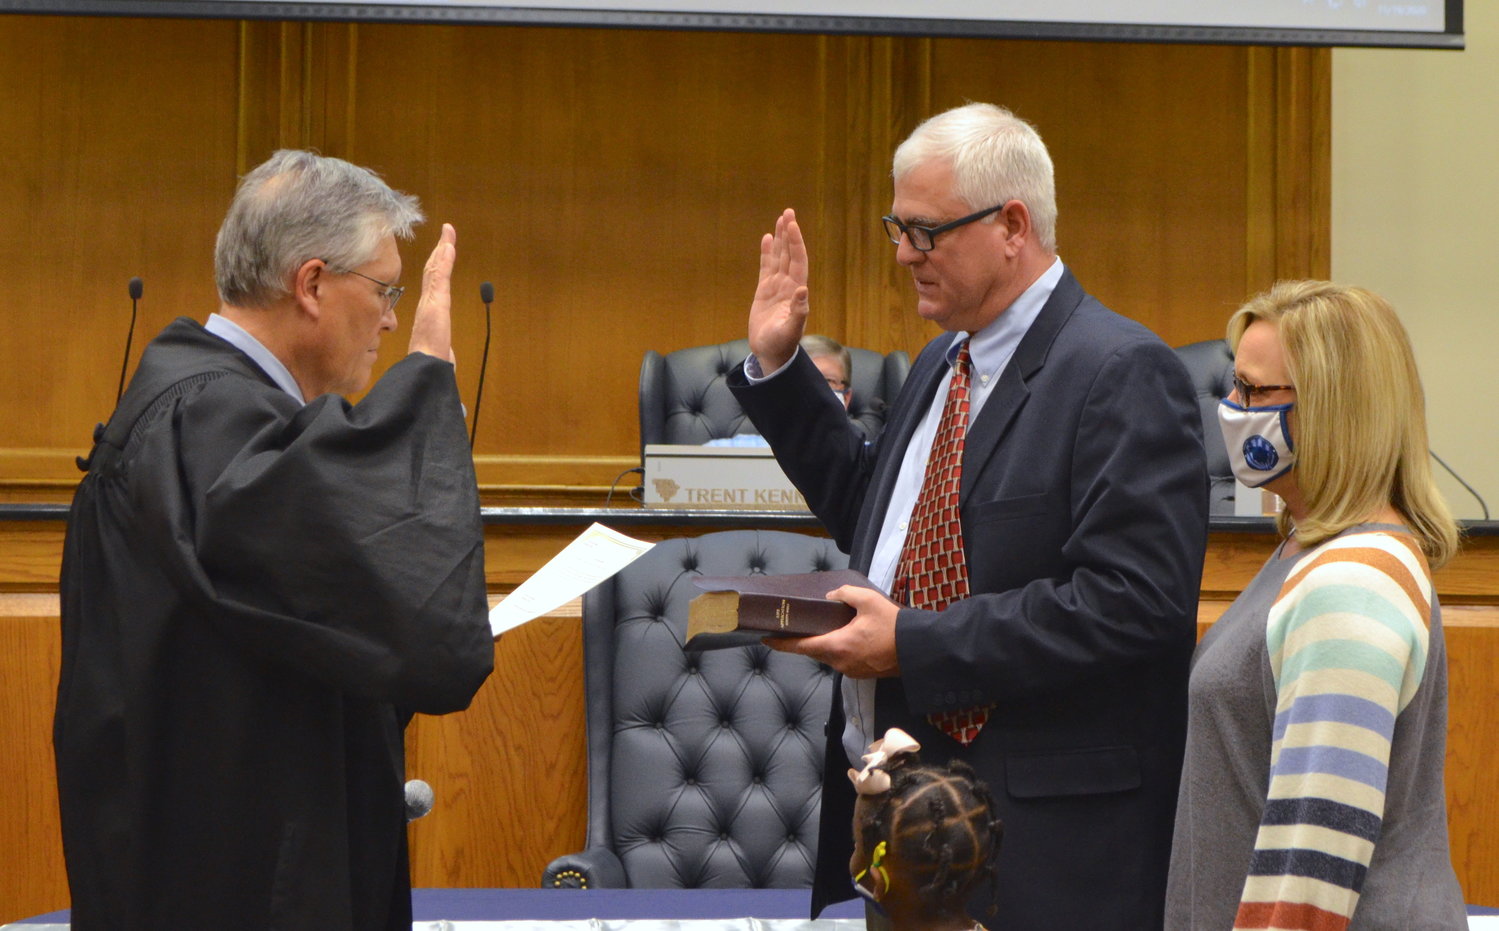 Ingle takes oath of office for third term on school board